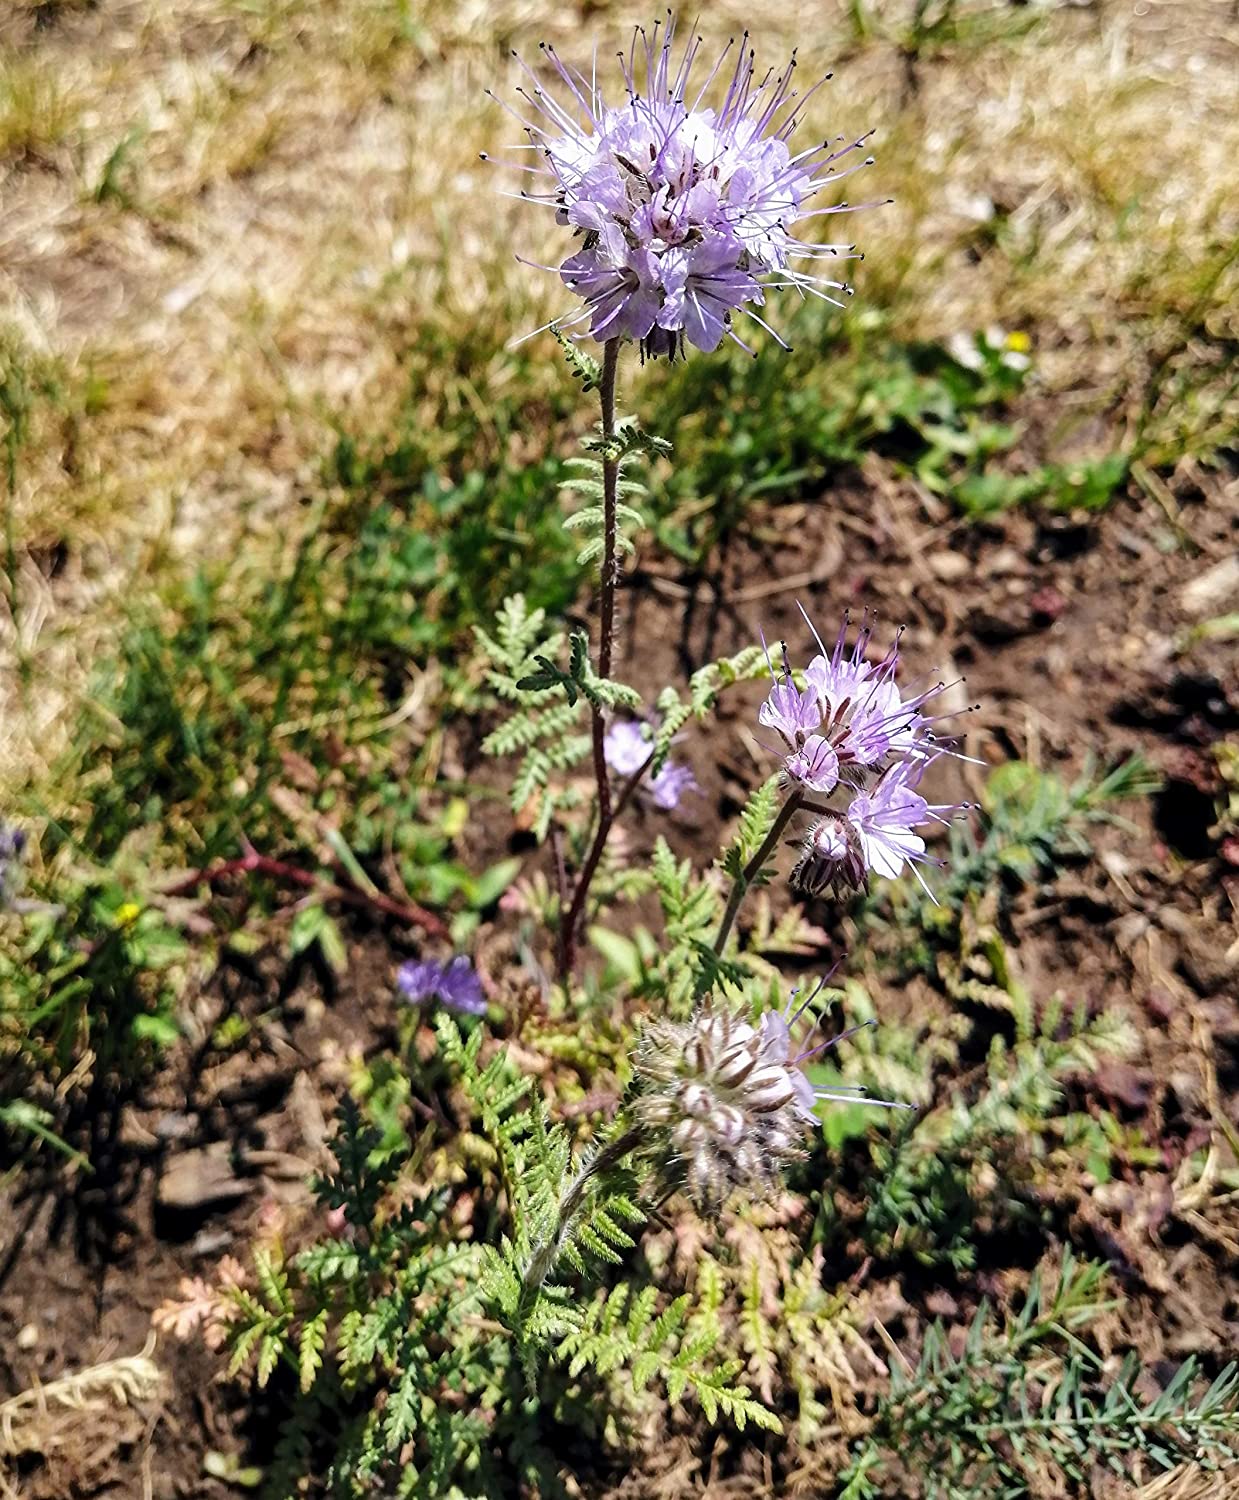 Hundredfold Lacy Phacelia 500 Flower Seeds - Phacelia tanacetifolia Blue or Purple Tansy, Fiddle Neck Fiddleneck, Non-GMO USA Native, for Cover Crop & Bee Garden Brand: Hundredfold